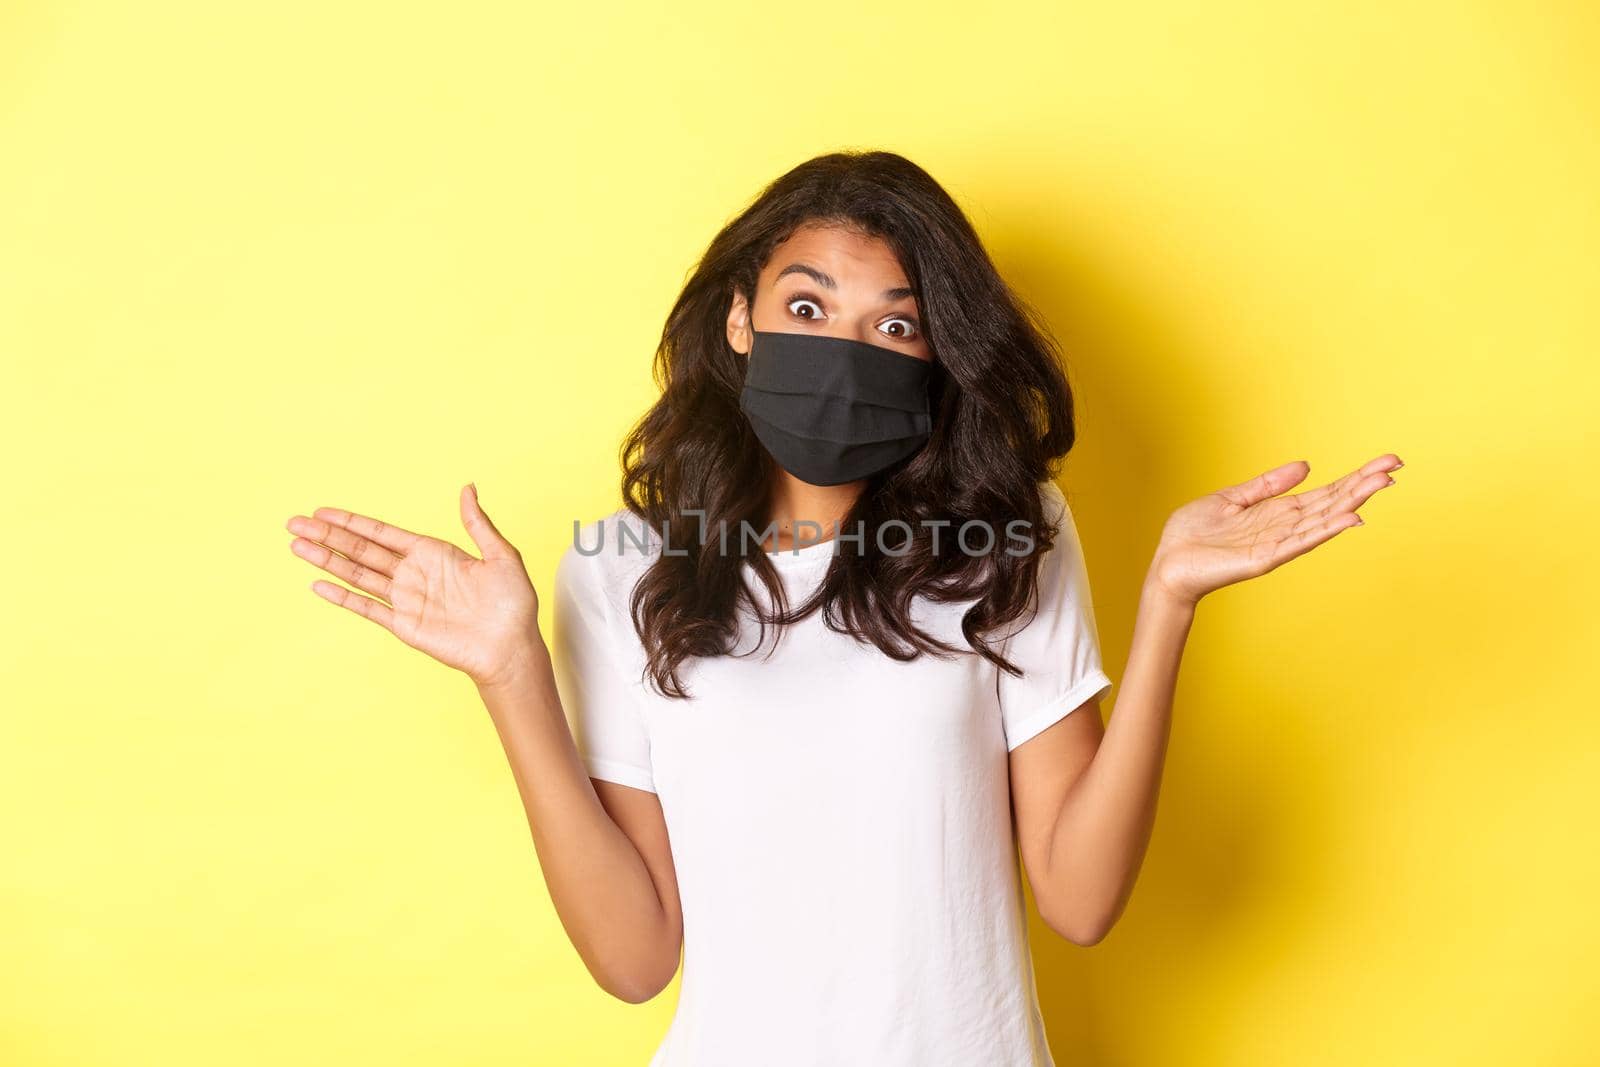 Concept of coronavirus, pandemic and lifestyle. Image of cute african-american girl in face mask, shrugging and looking clueless, dont know anything, standing over yellow background.